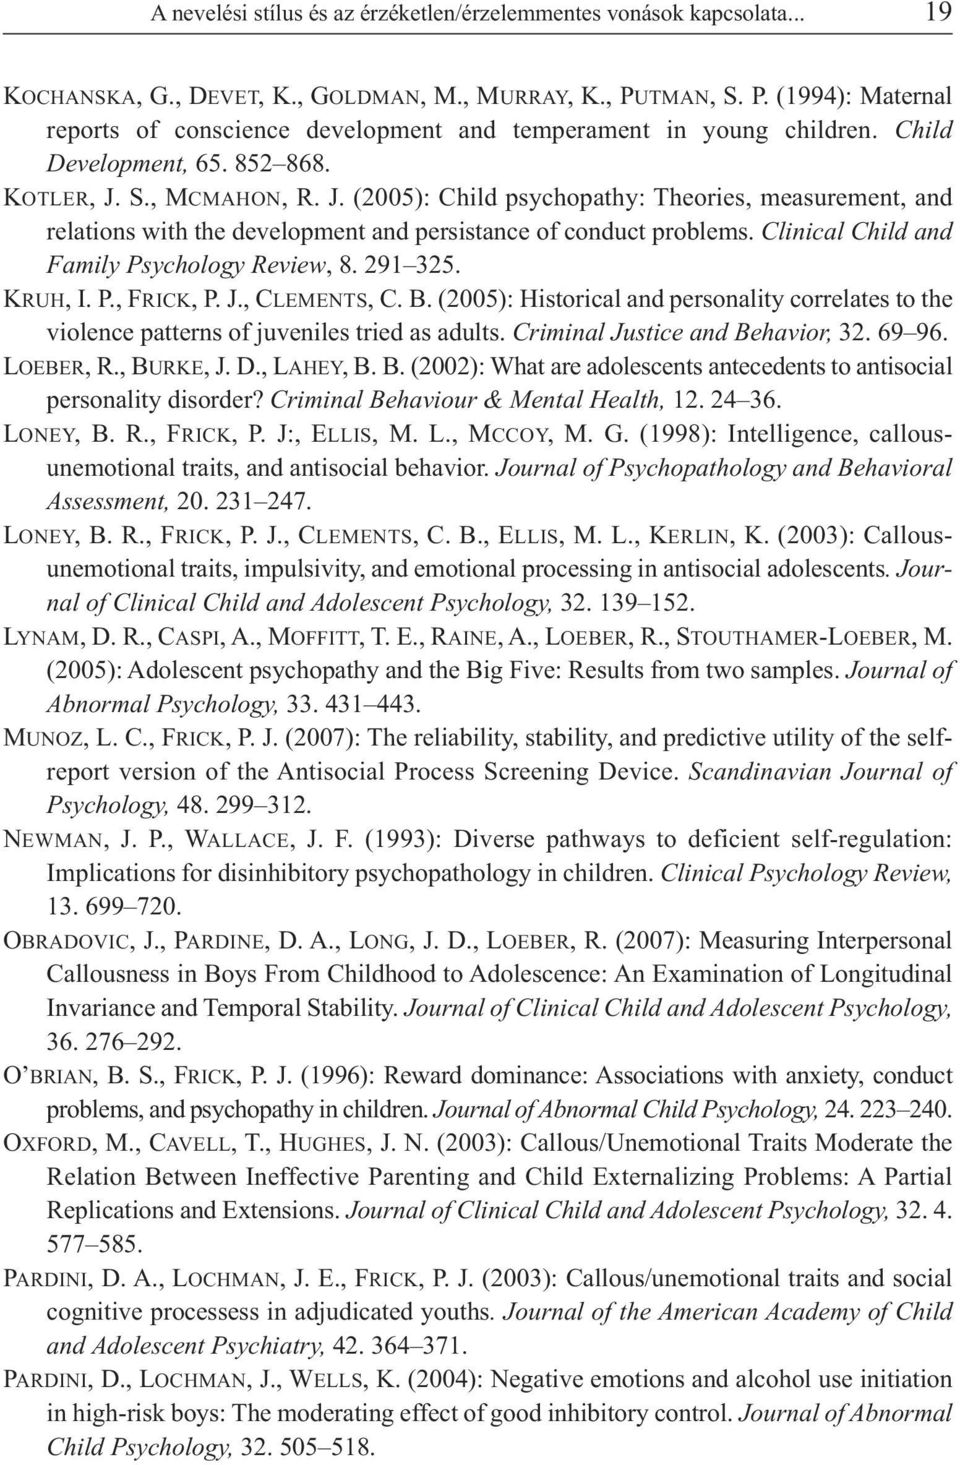 S., MCMAHON, R. J. (2005): Child psychopathy: Theories, measurement, and relations with the development and persistance of conduct problems. Clinical Child and Family Psychology Review, 8. 291 325.